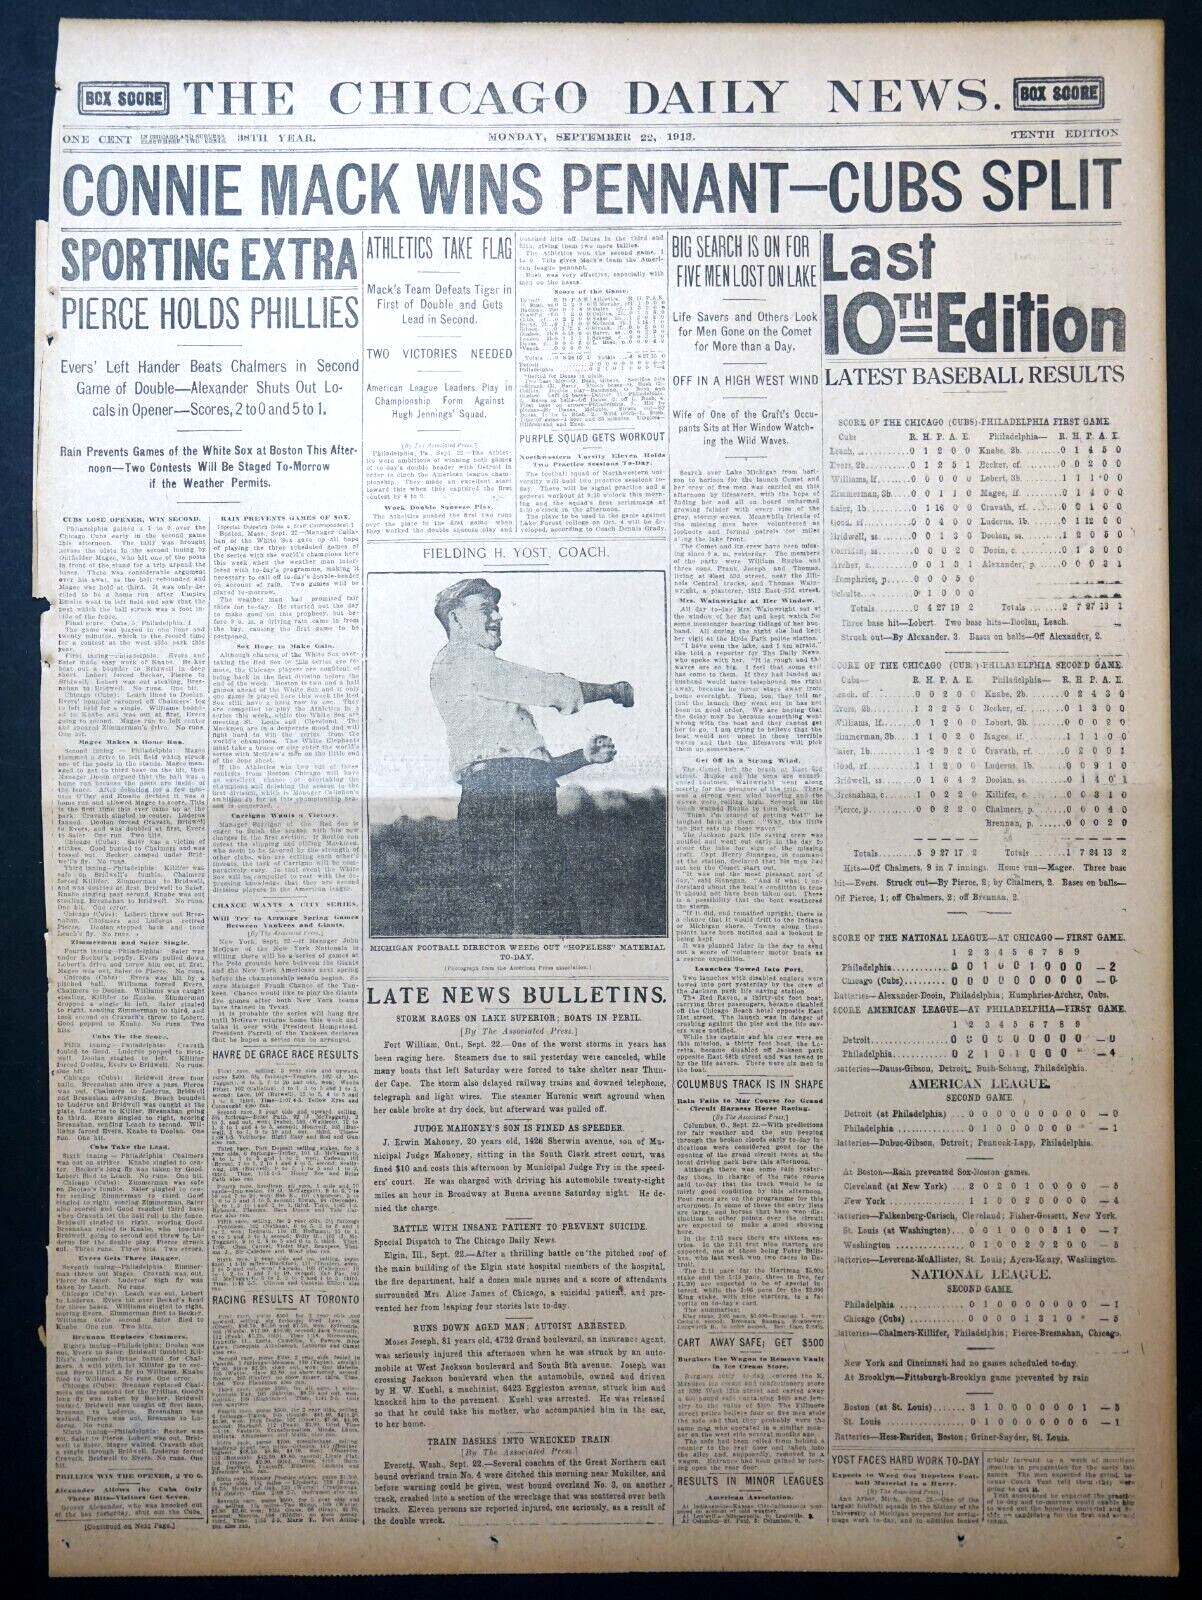 1913 Chicago Sports Page - Connie Mack & Philadelphia Athletics Win A.L. Pennant